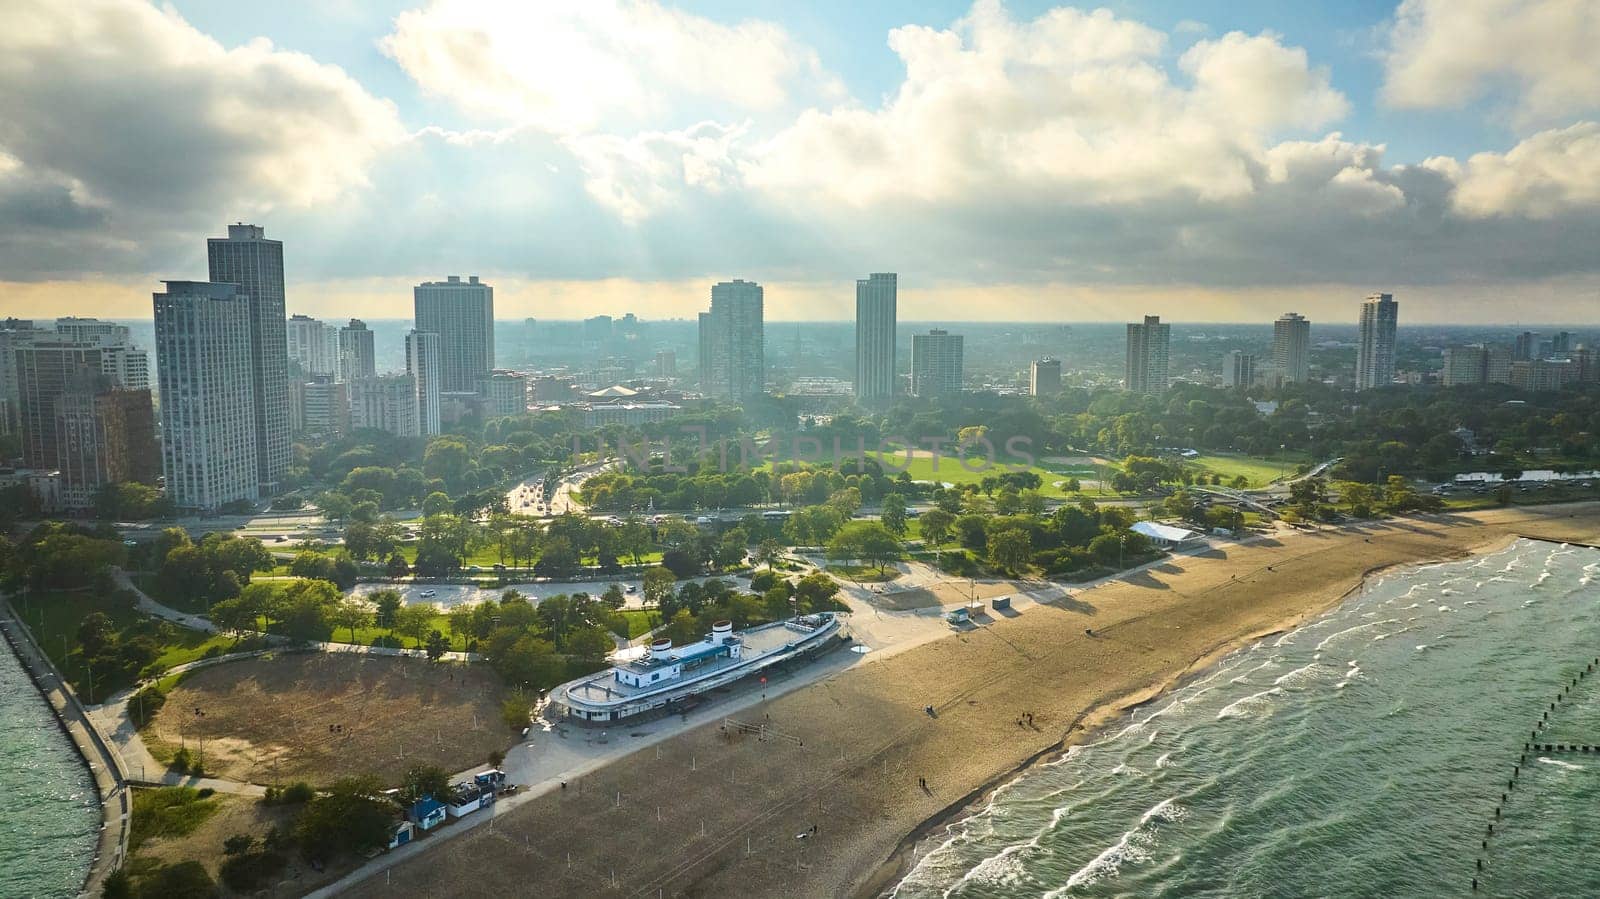 Image of Sandy beach along Chicago coast with Lake Michigan aerial, skyscraper buildings in summer with park